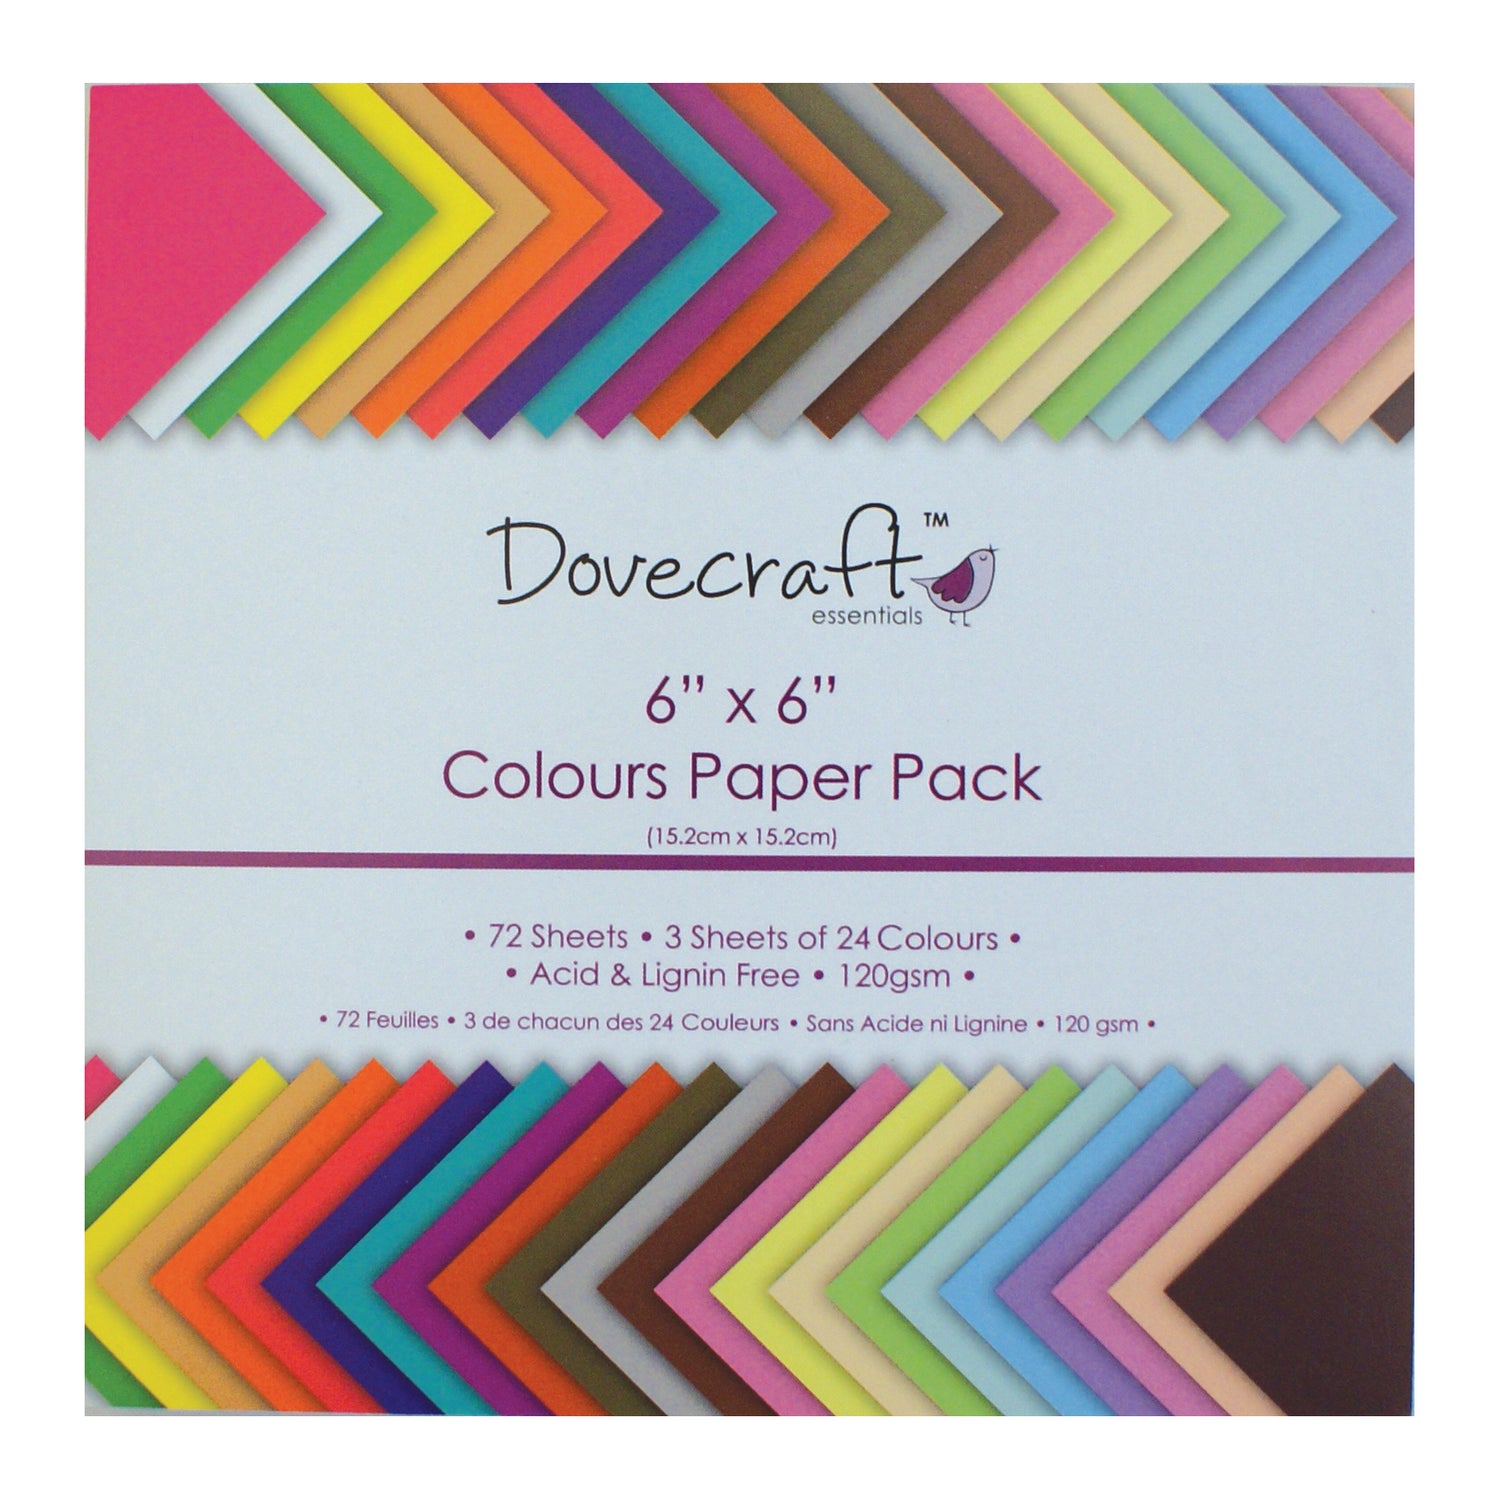 Dovecraft 6 x 6 colours paper pack